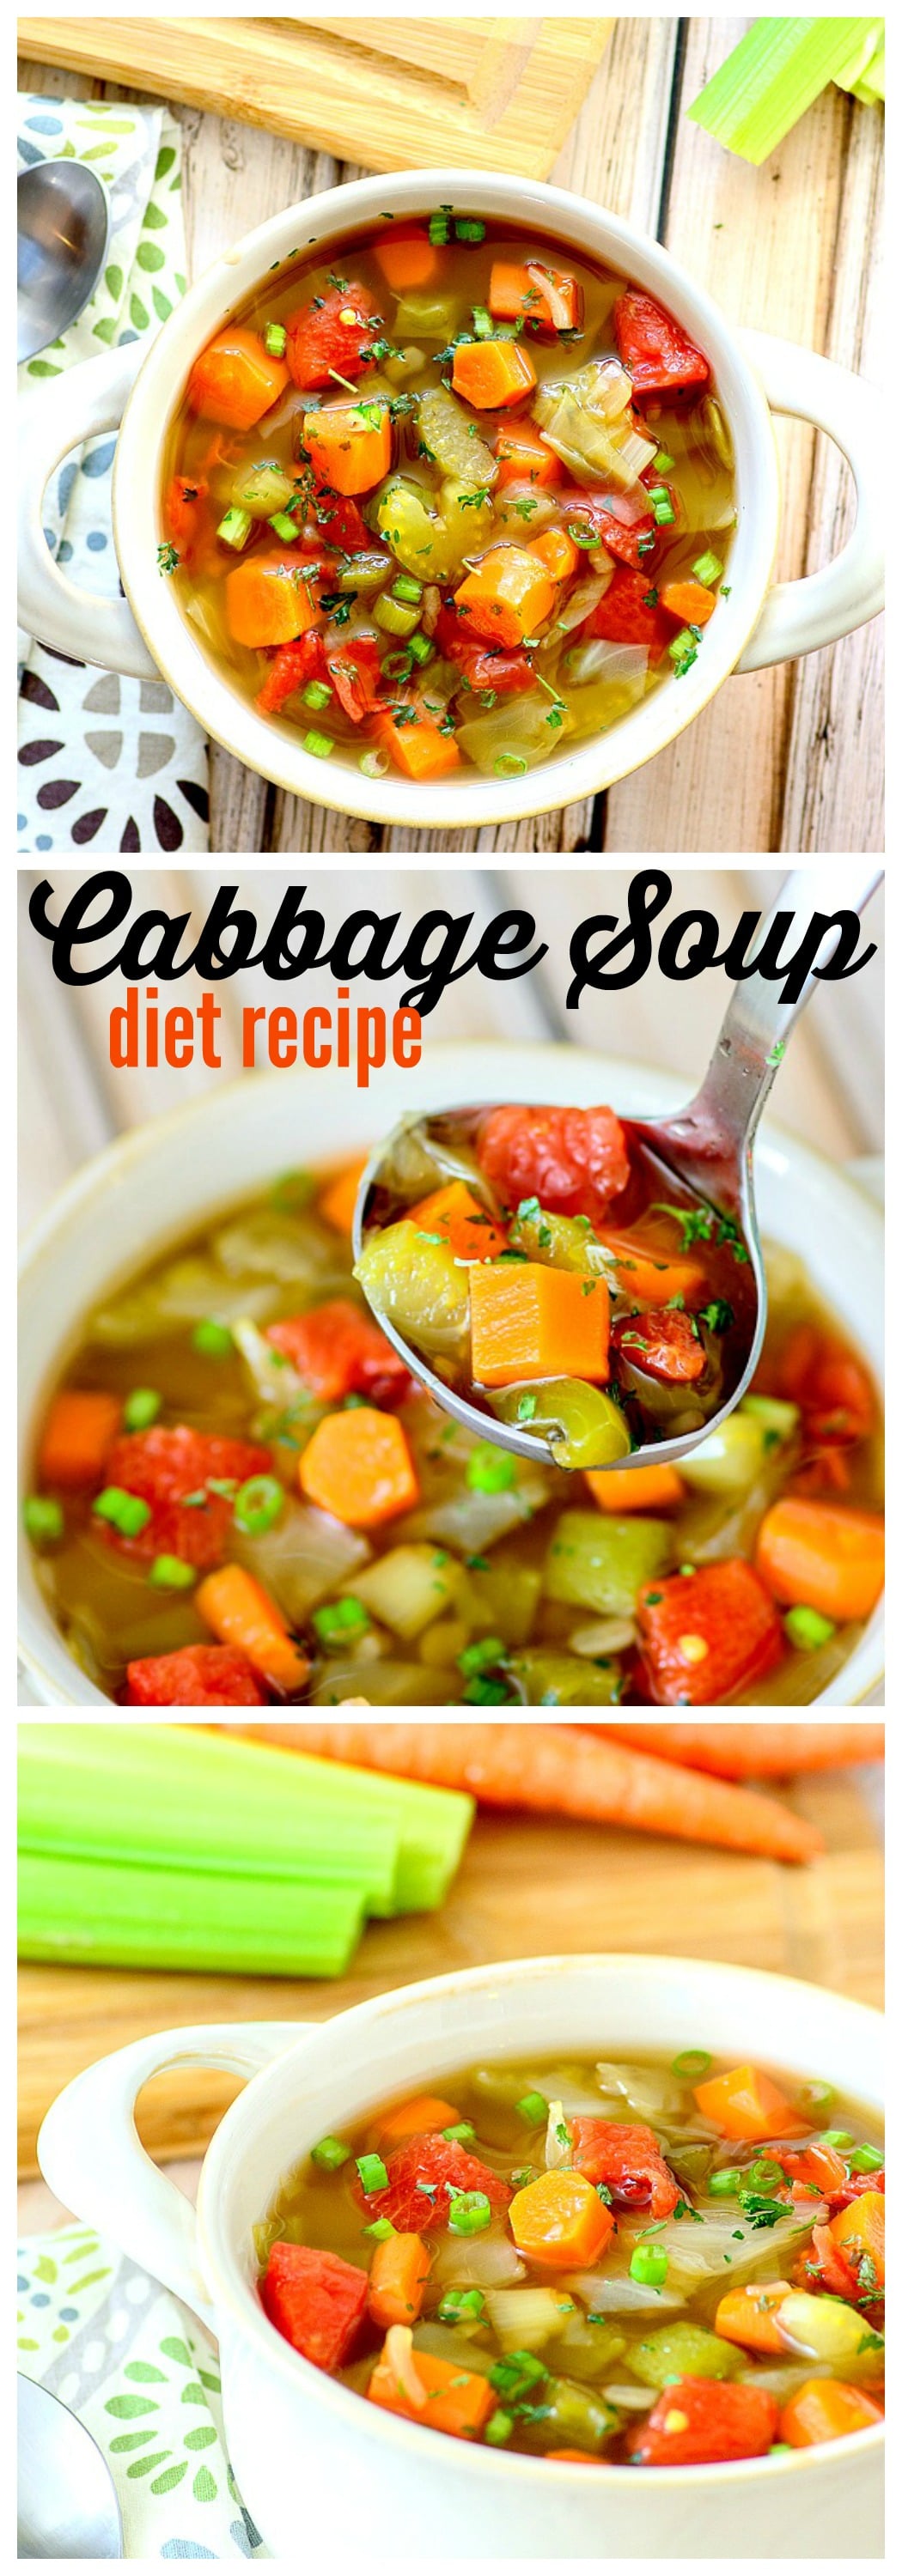 Cabbage Soup Recipe for the Cabbage Soup Diet, fantastic, tasty and more delicious than you can imagine